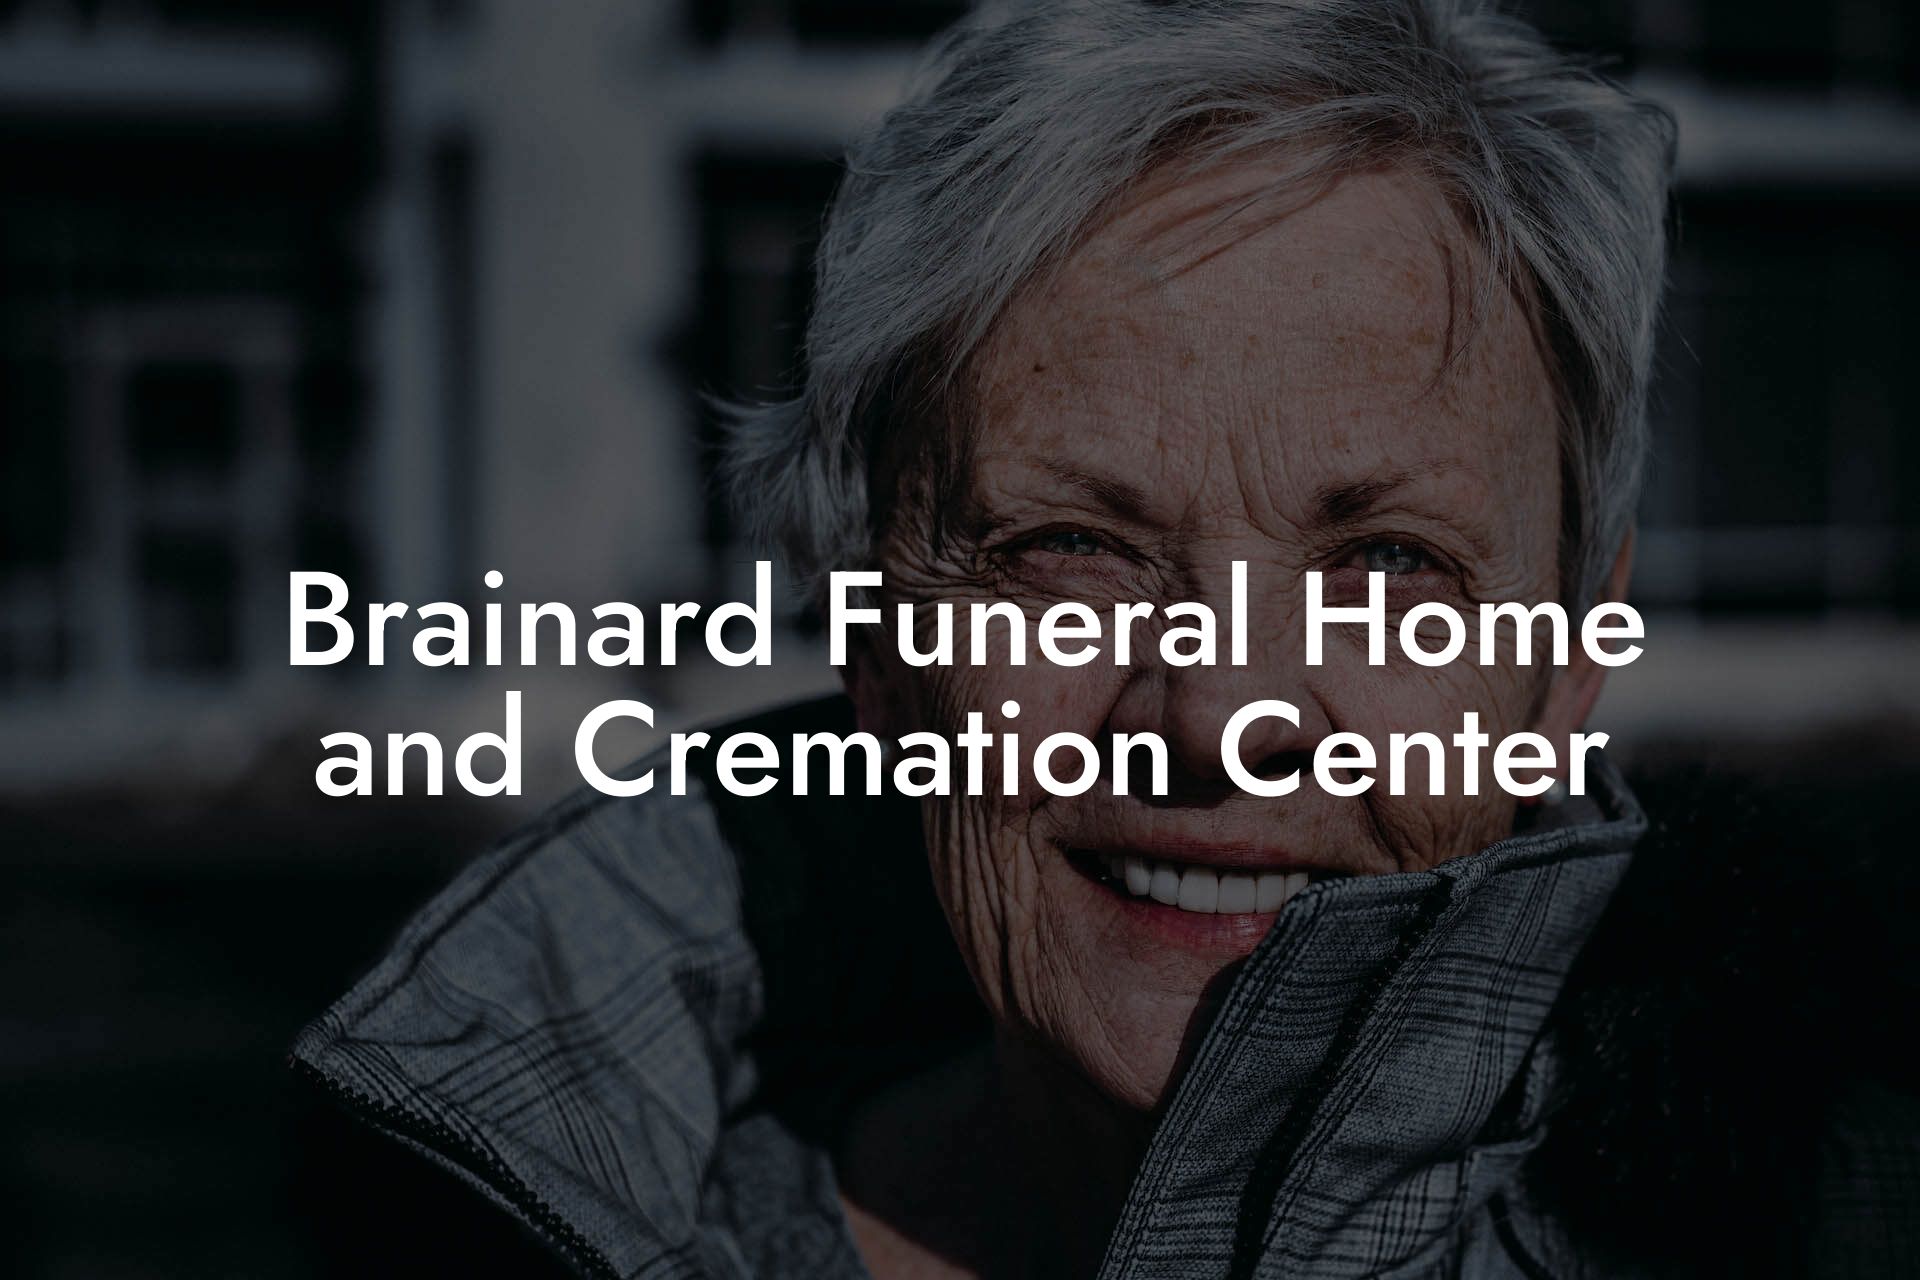 Brainard Funeral Home and Cremation Center